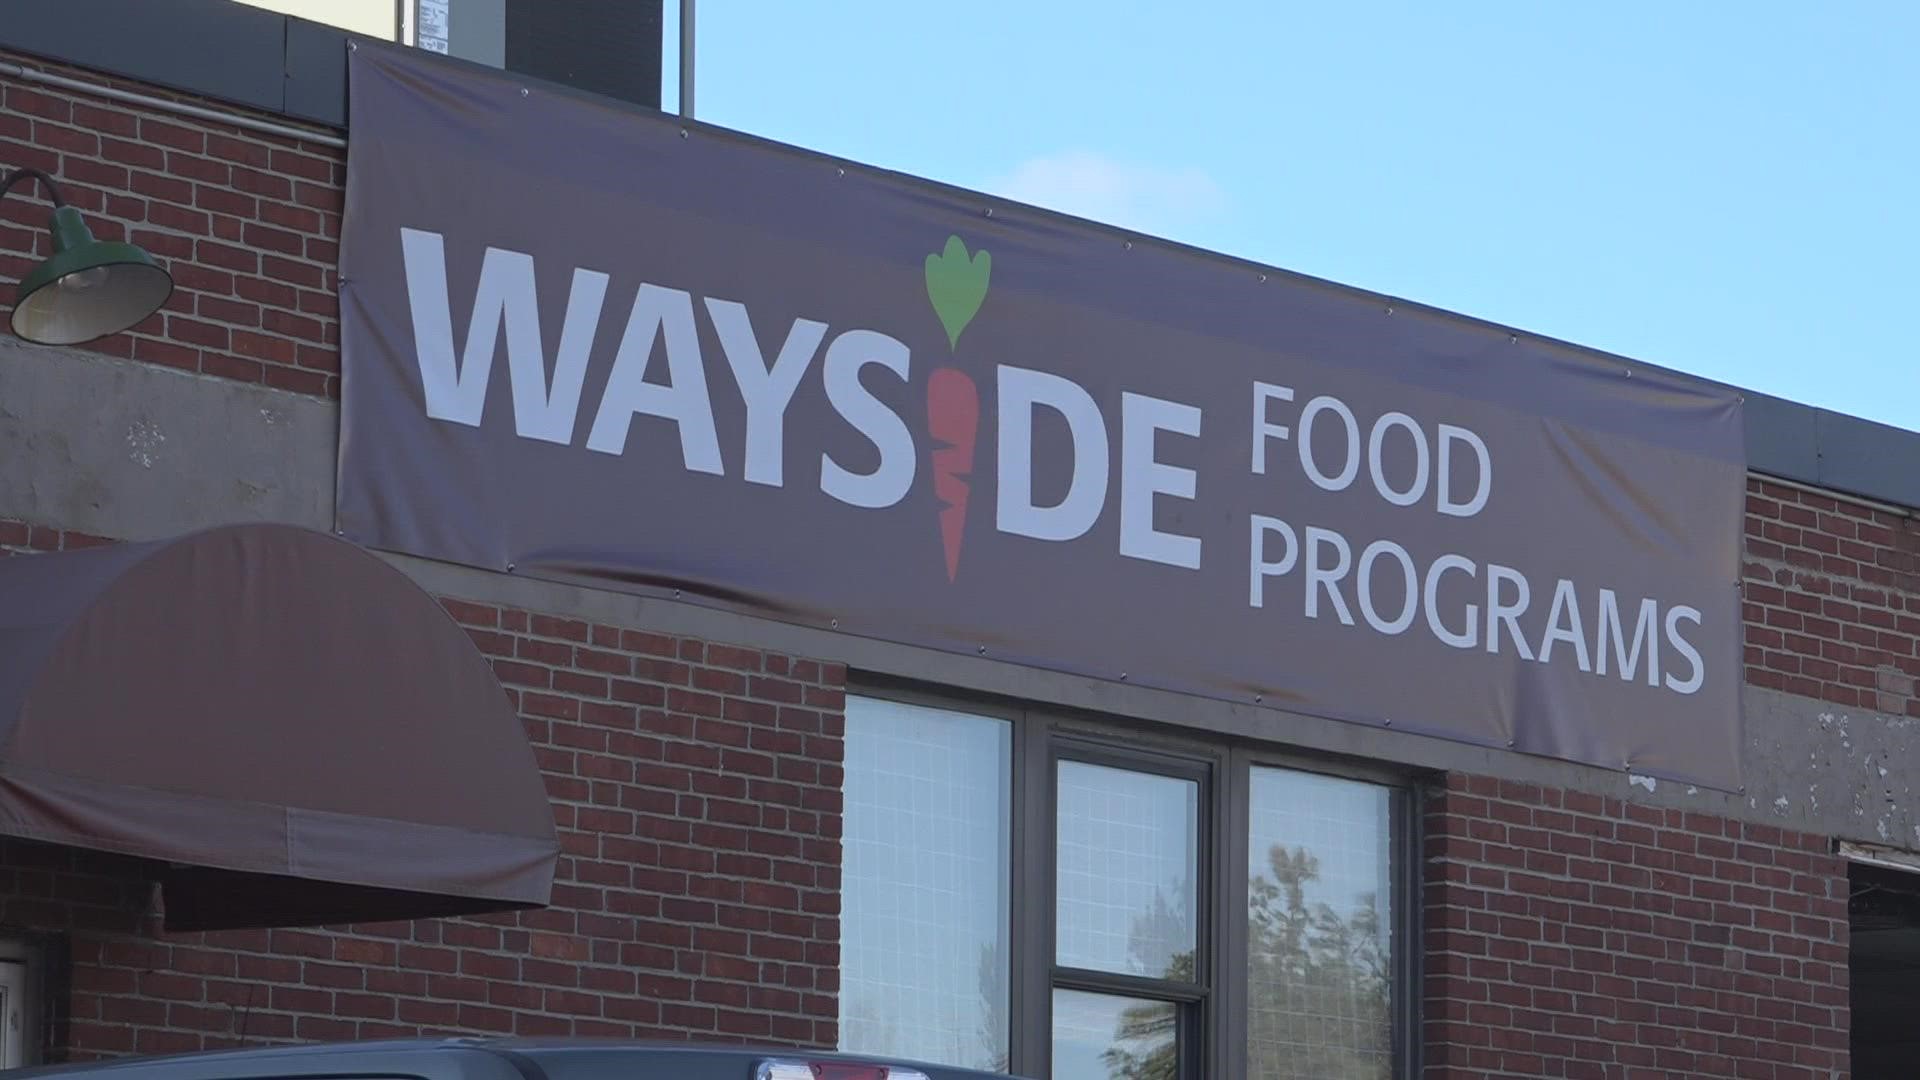 Wayside Food Programs conducted seven focus groups with 33 community leaders from seven cultures to figure out how they could serve immigrants better.